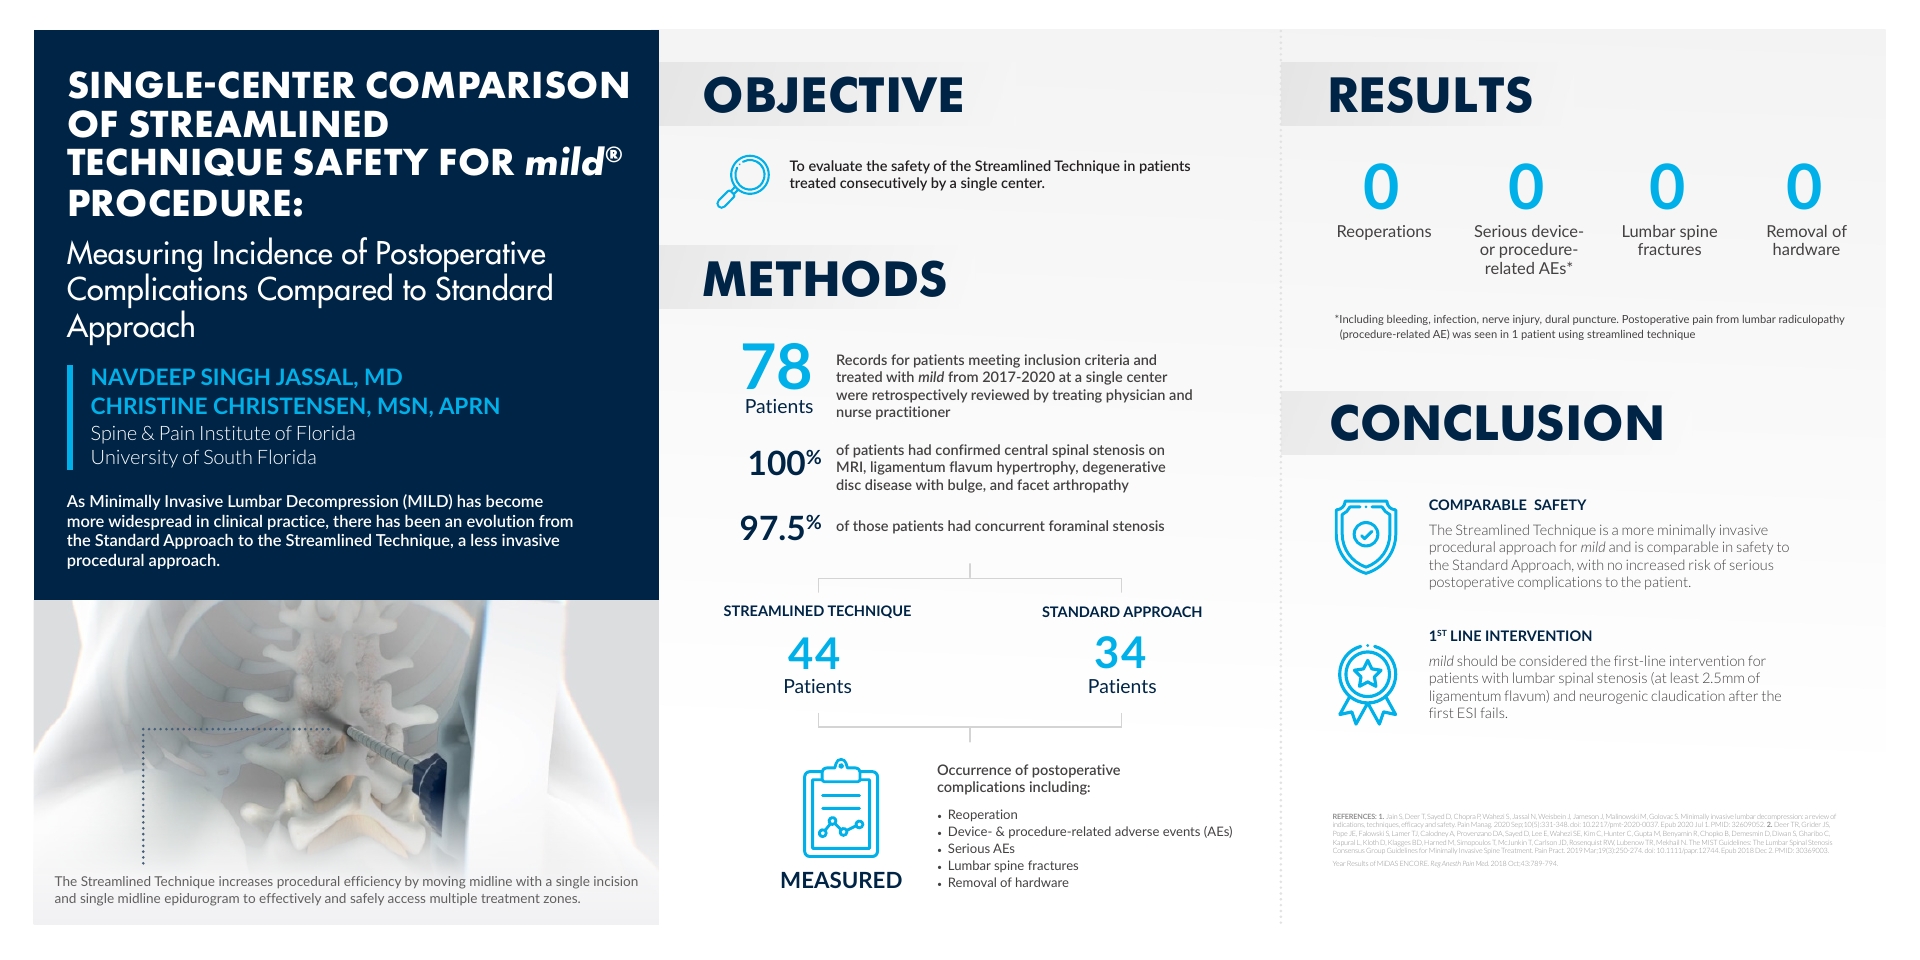 Infographic showing objective, methods and results of Single-Center Comparison of Streamlined Technique Safety for mild® Procedure